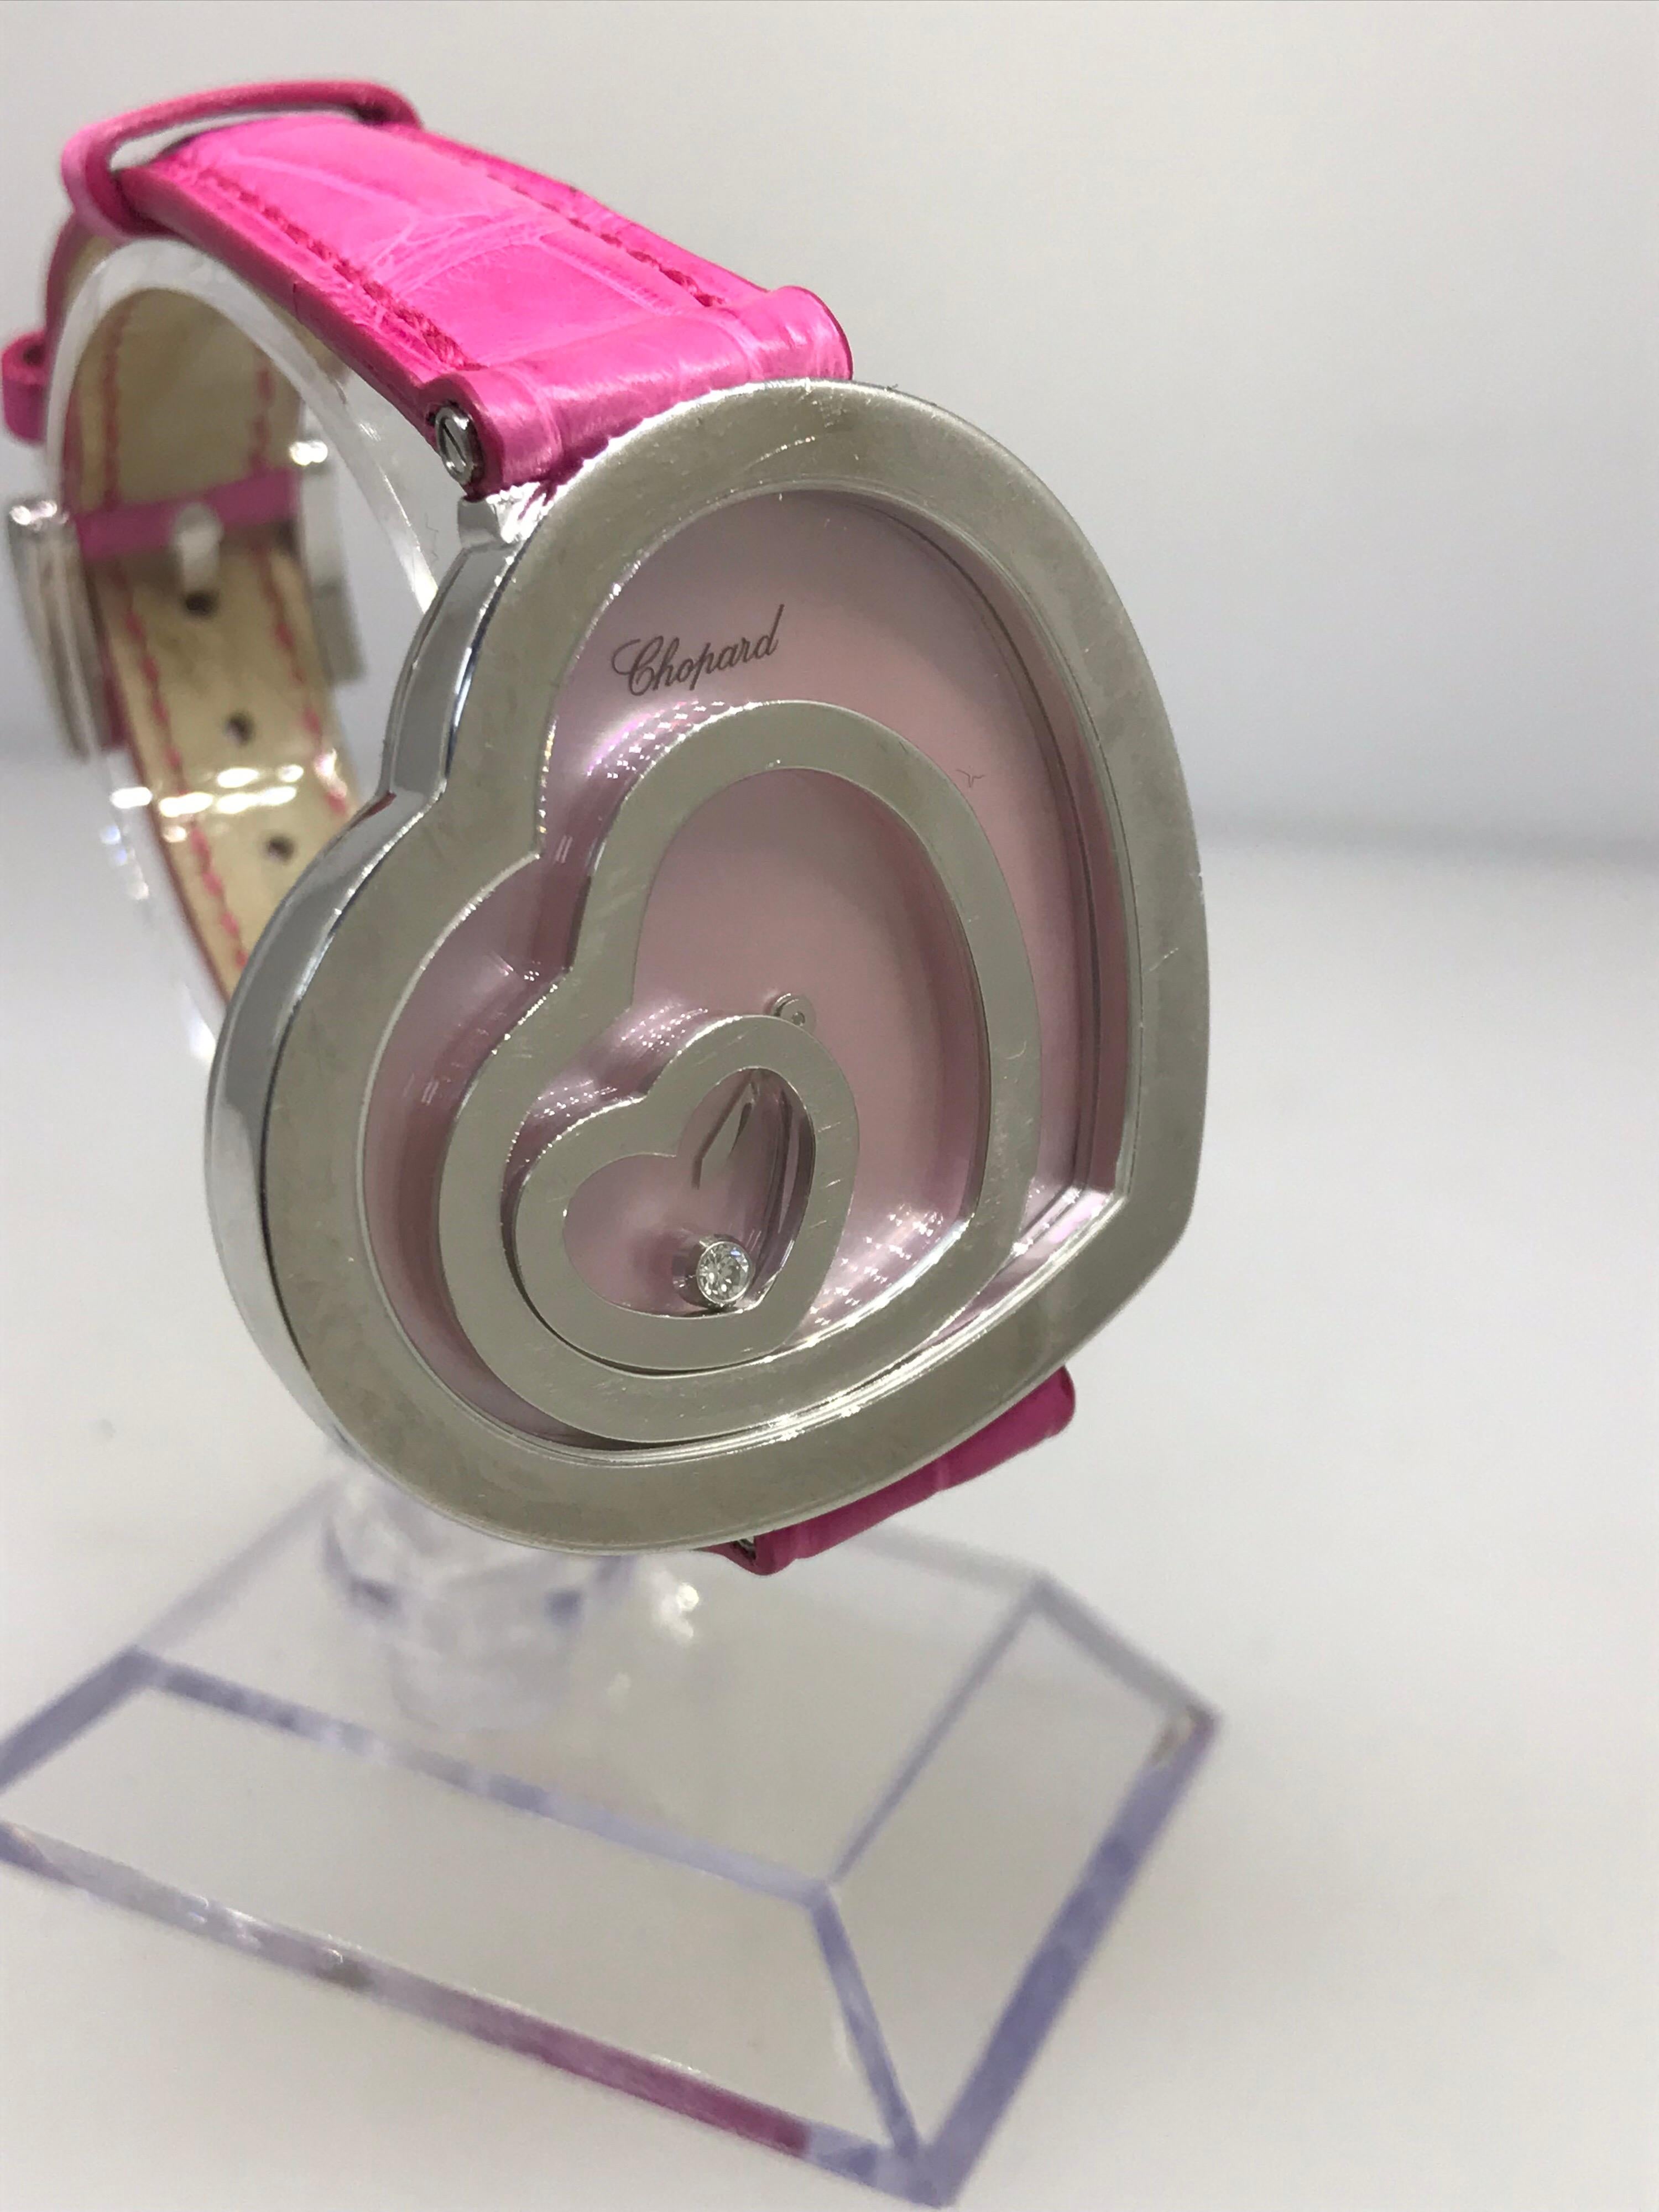 Chopard Happy Spirit Hearts Ladies Watch

Model Number: 20/9056-1001

100% Authentic

New/ Old Stock

Comes with original Chopard Box and Instruction Manual

18 Karat White Gold Case & Buckle

Pink Mother of Pearl Dial

Case Dimensions: 40mm x